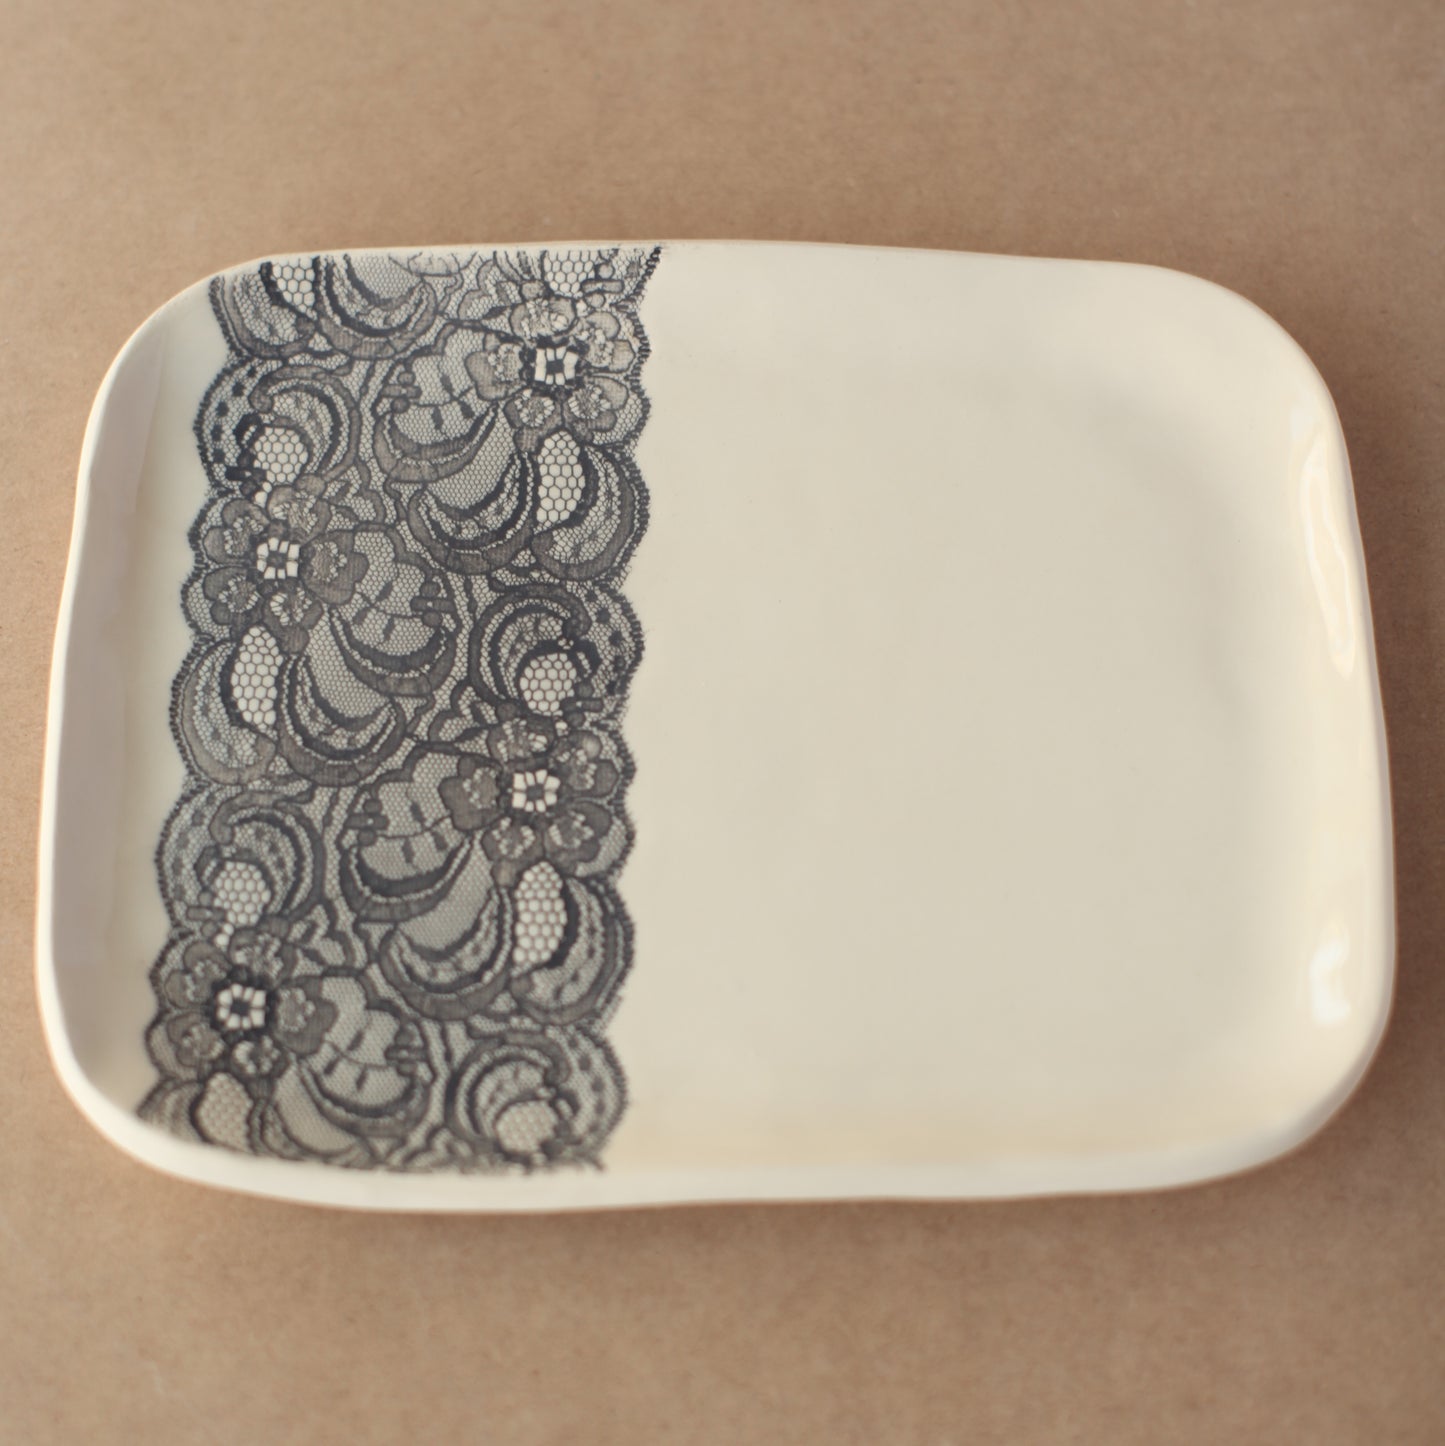 Pottery Workshop - Pressed Lace Dishes and Platters - Sign up to register interest